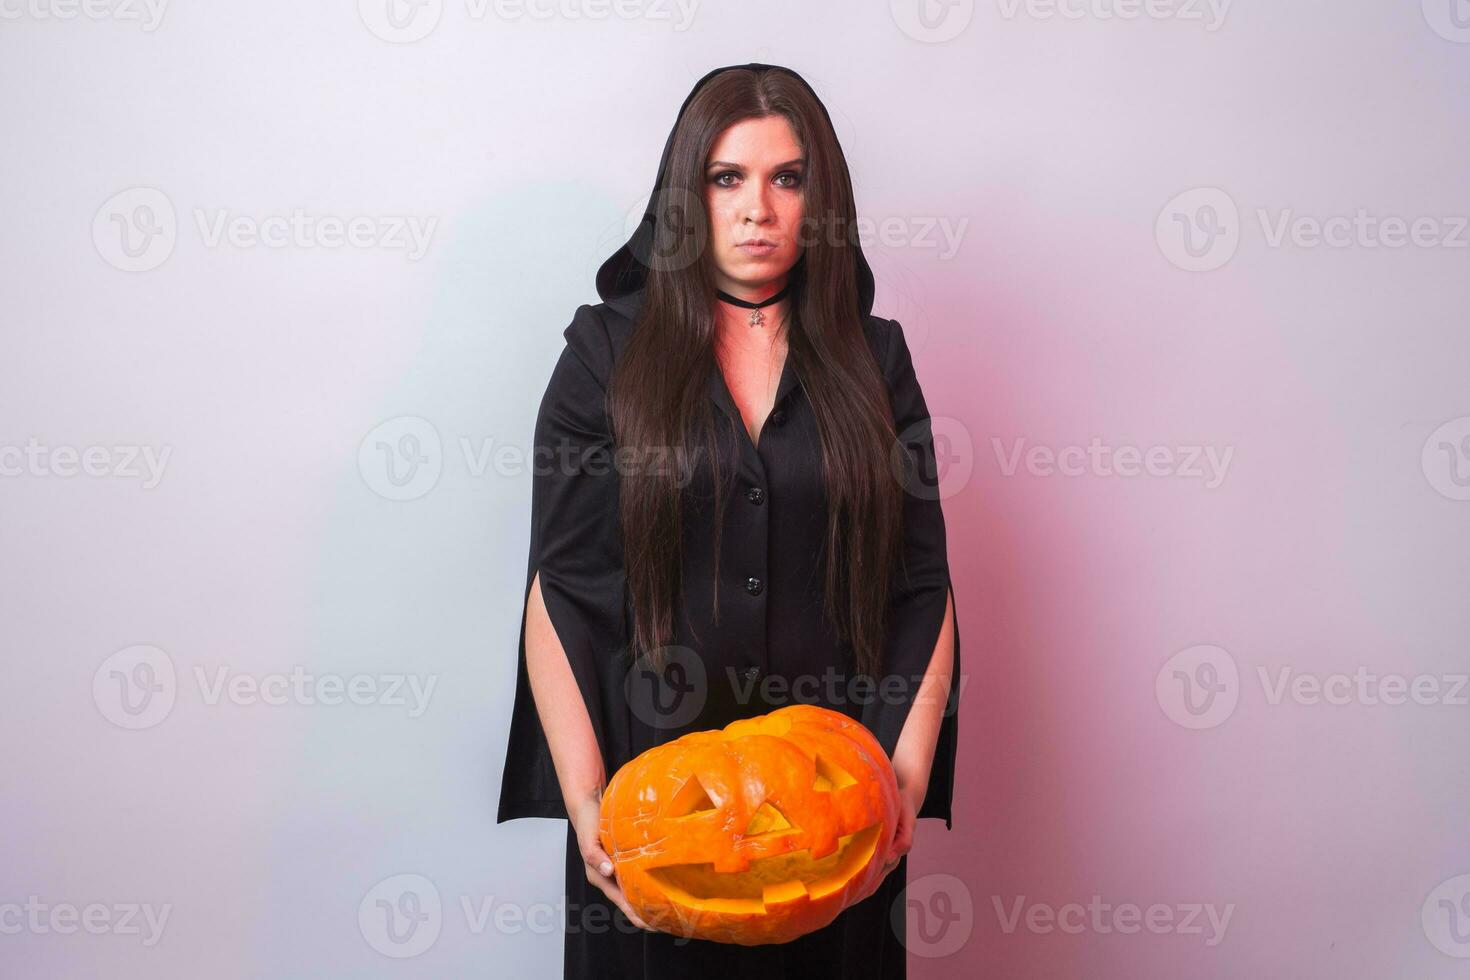 Woman as witch is standing with the pumpkin in the studio. Halloween and carnival concept photo